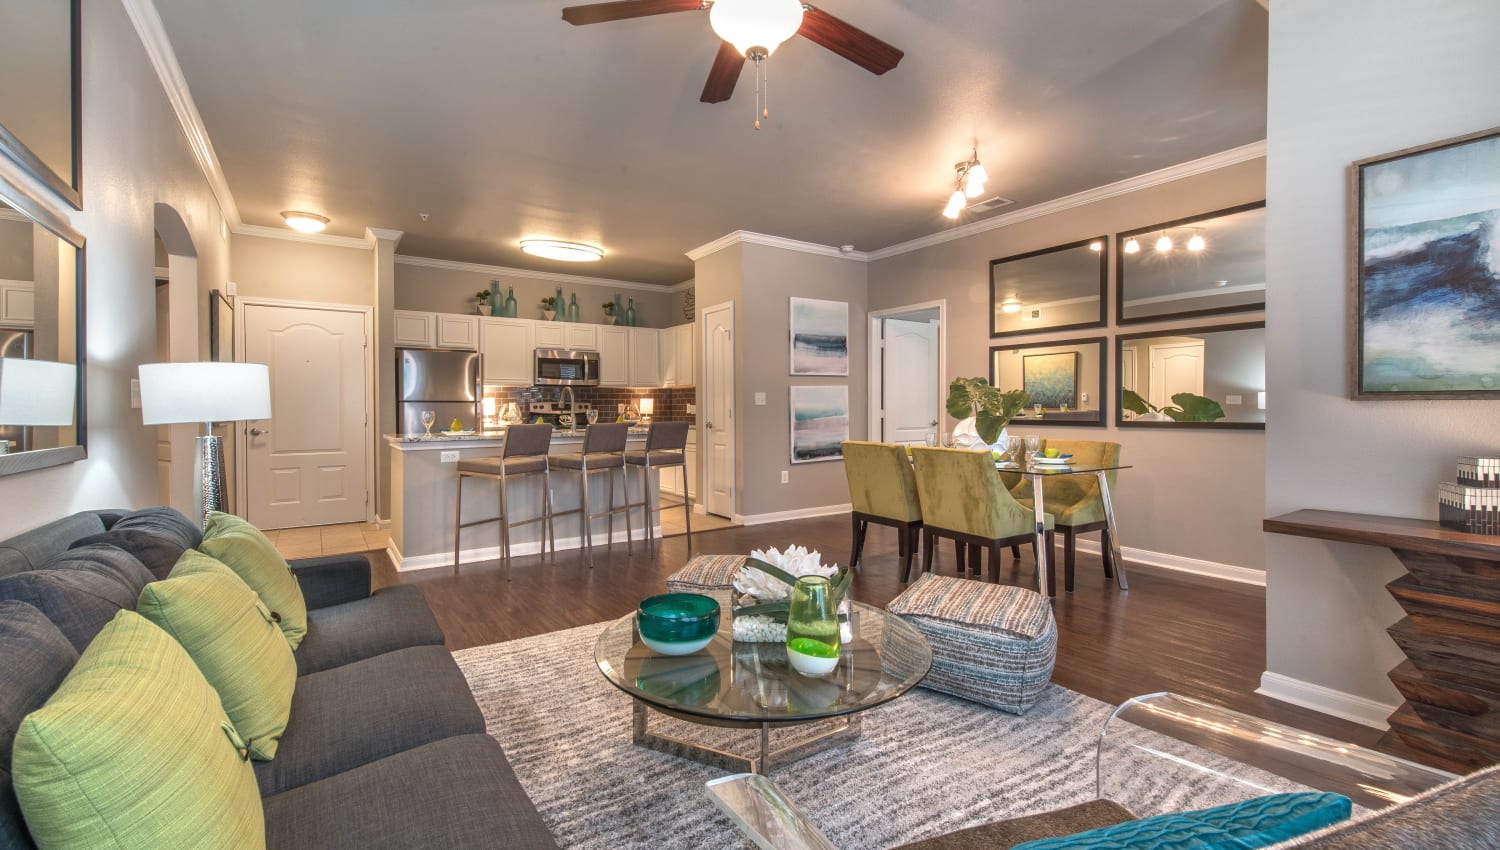 Well-furnished model apartment's living space at Olympus Las Colinas in Irving, Texas